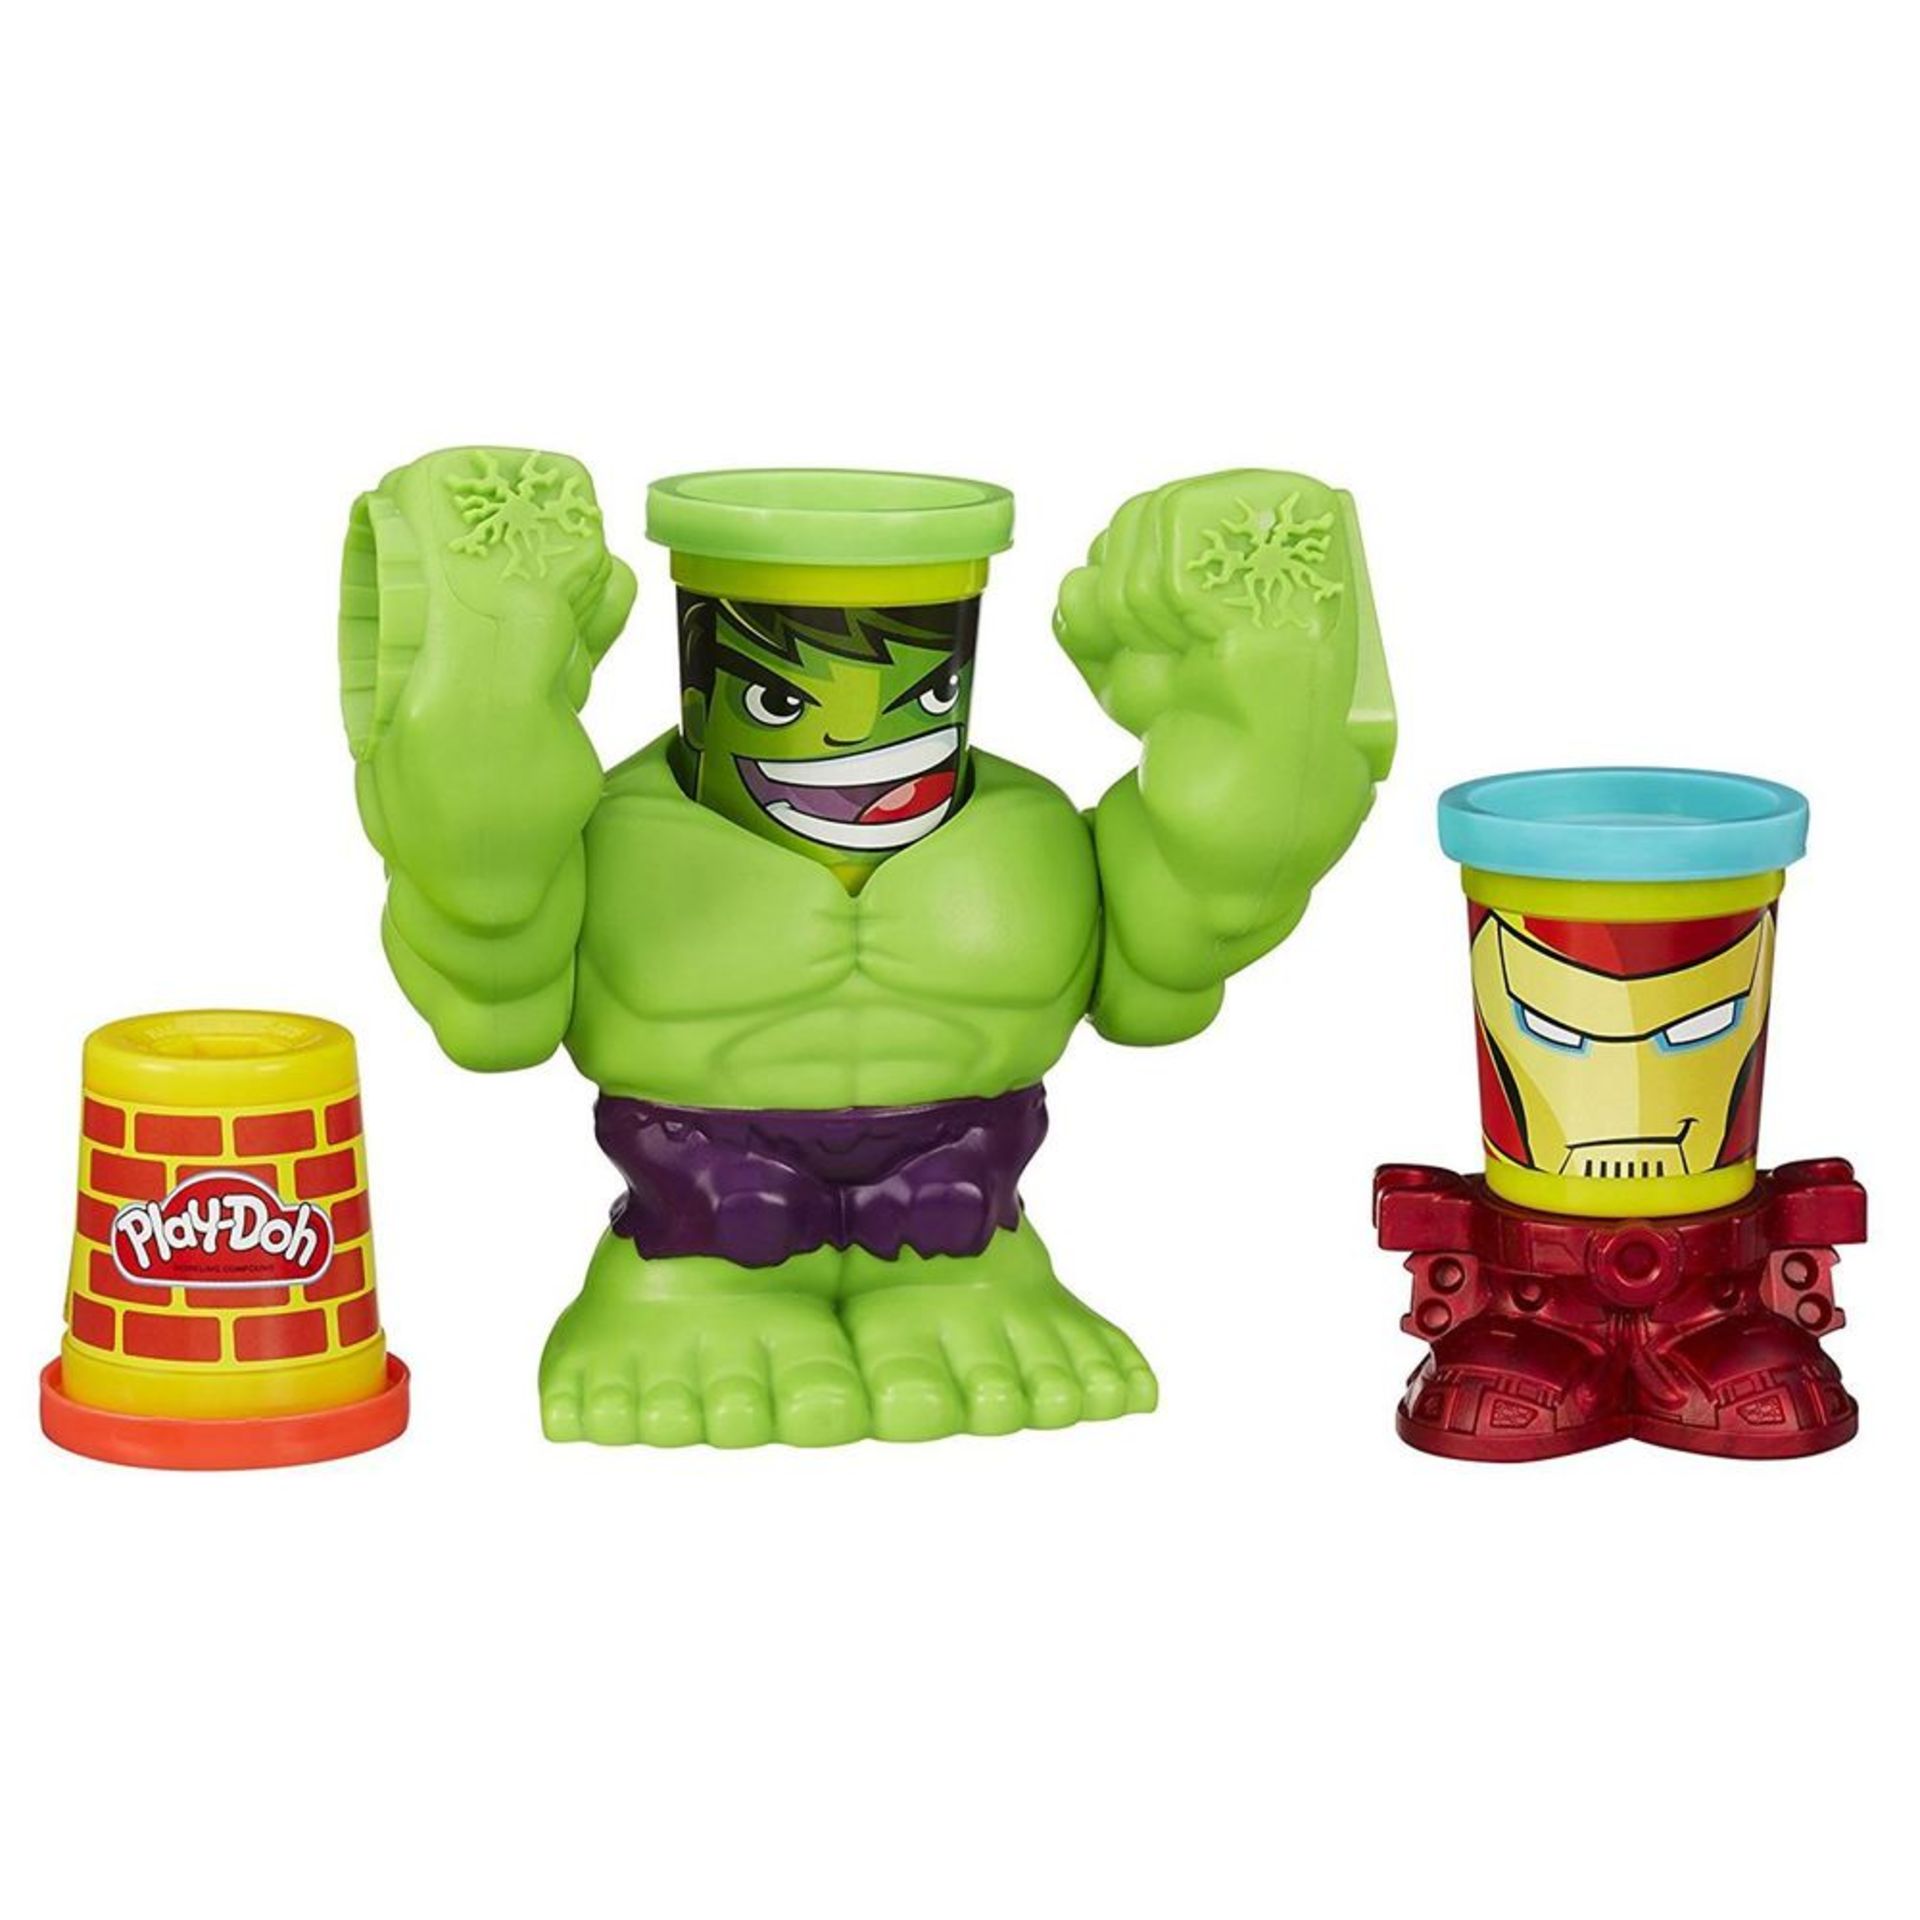 V Brand New Hasbro Marvel Can-Heads Smashdown Hulk With 3 Play-Doh Tubs - Image 2 of 2